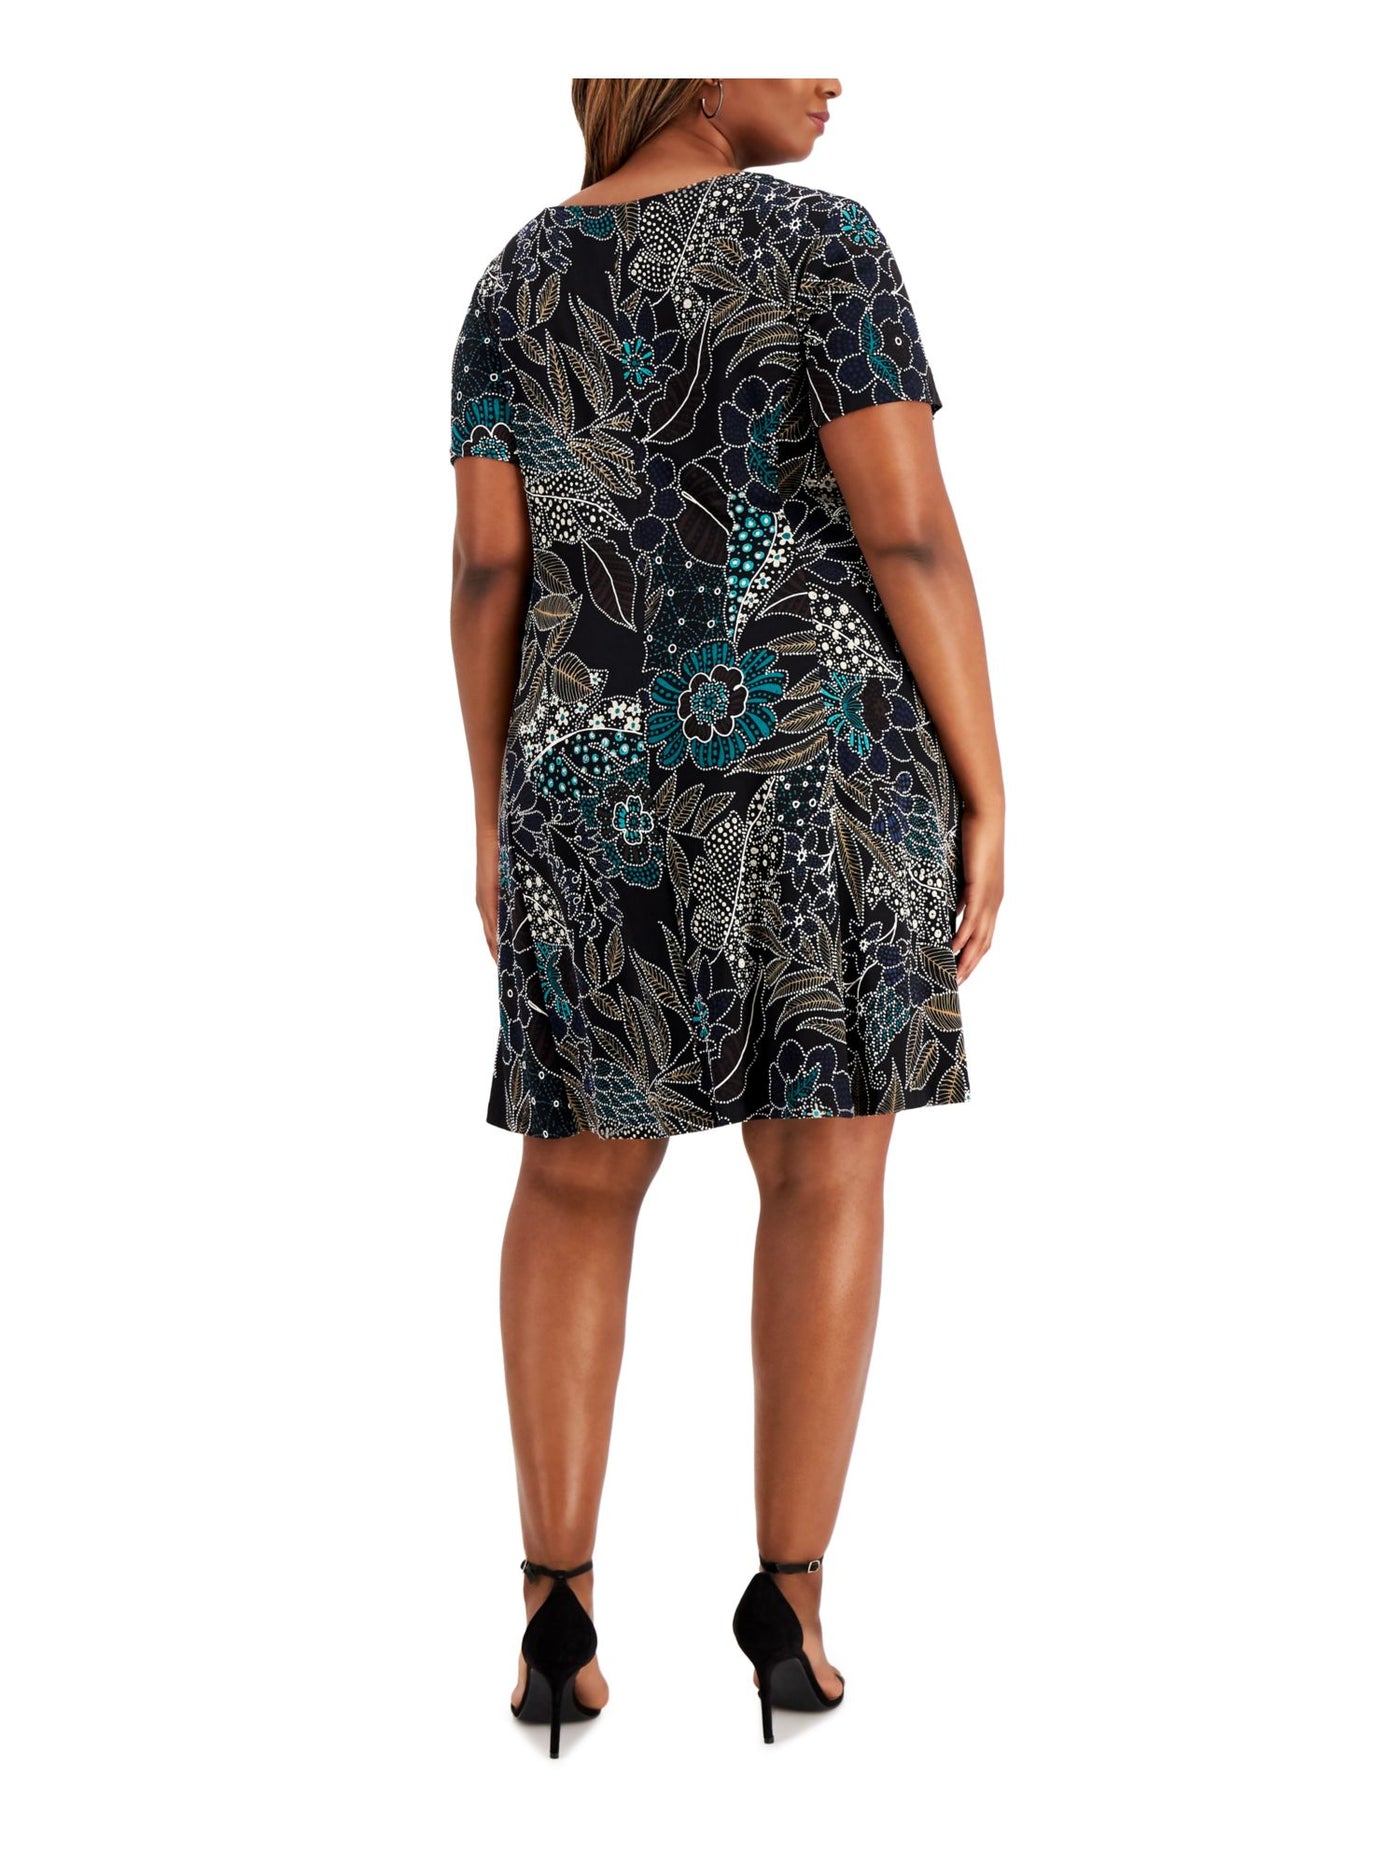 CONNECTED APPAREL Womens Stretch Short Sleeve V Neck Above The Knee Party Fit + Flare Dress